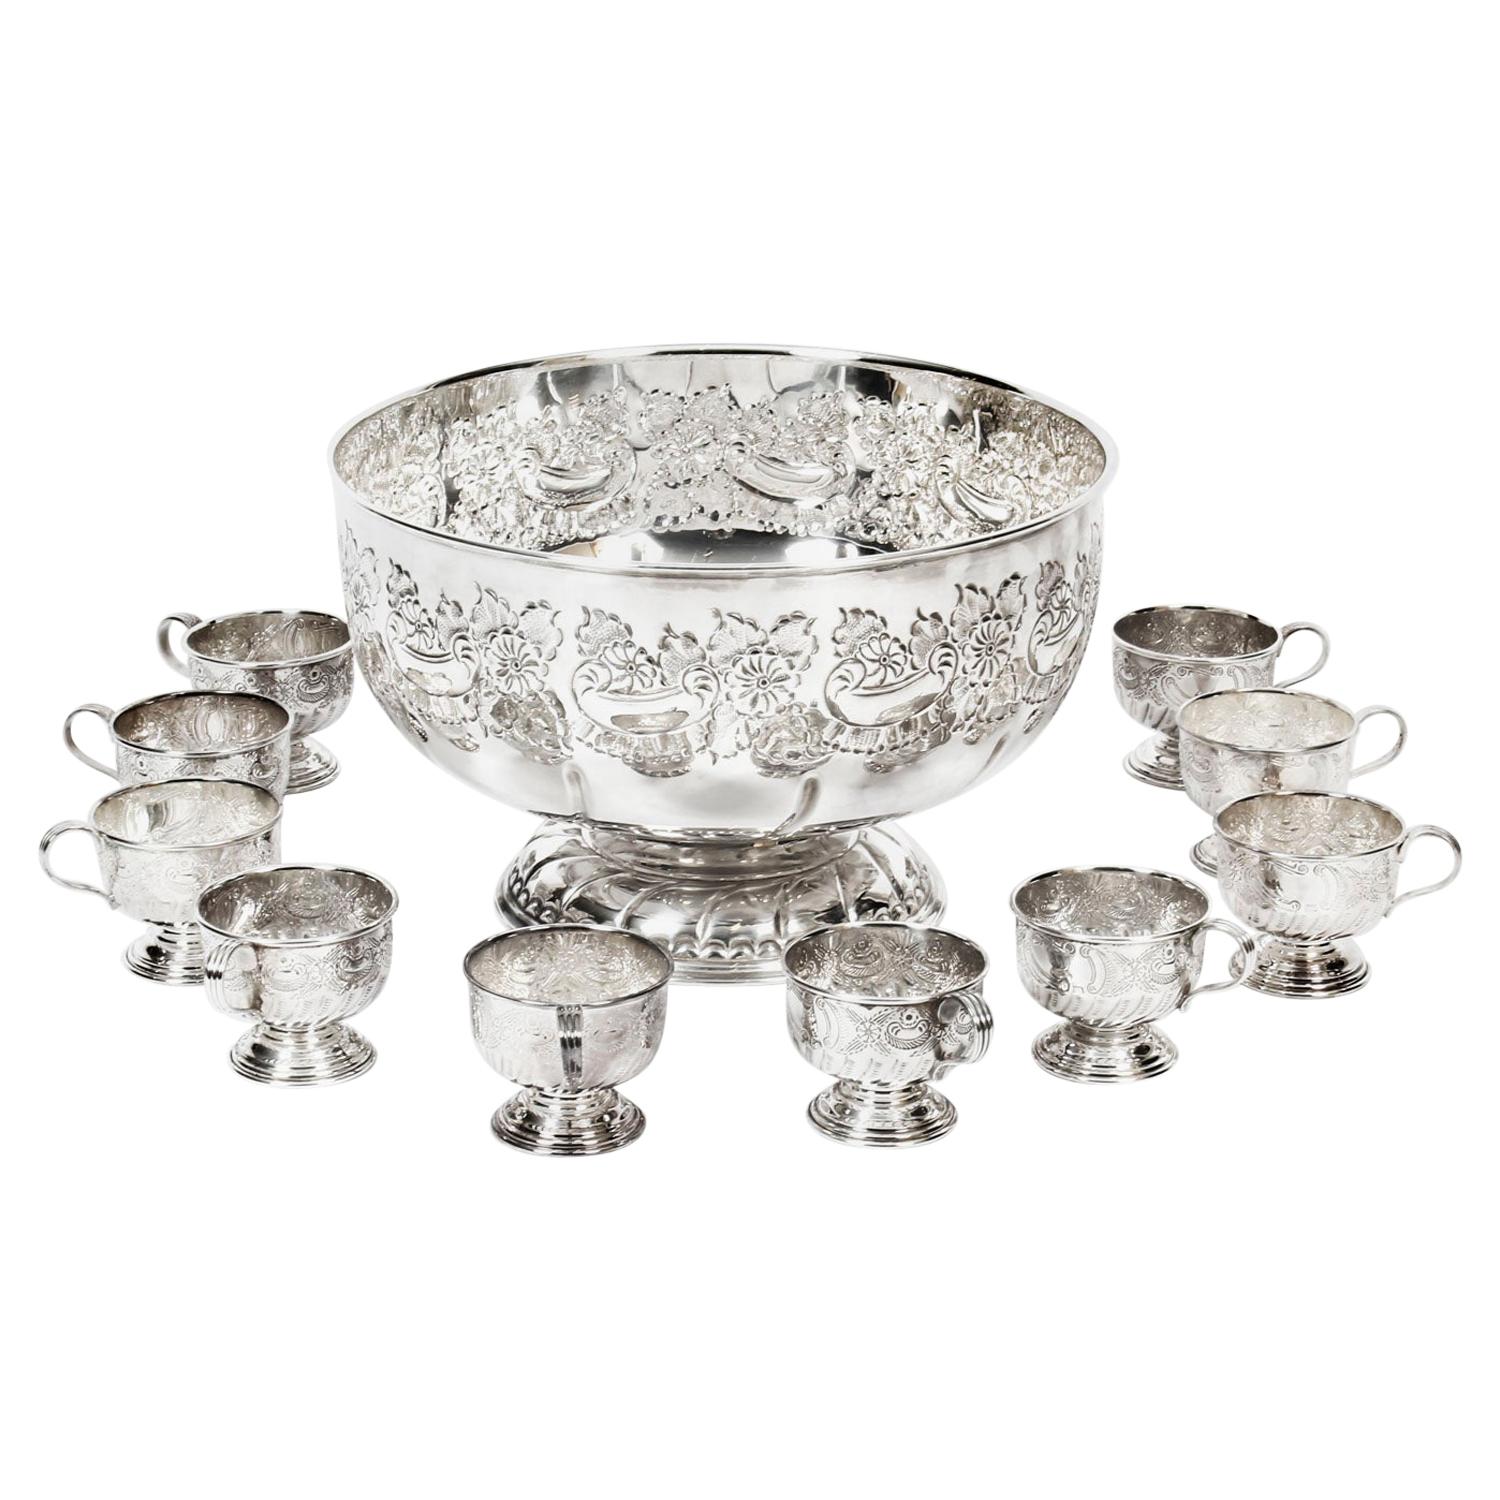 Vintage Viners of Sheffield Punch Bowl Set with 12 Cups, Mid-20th Century